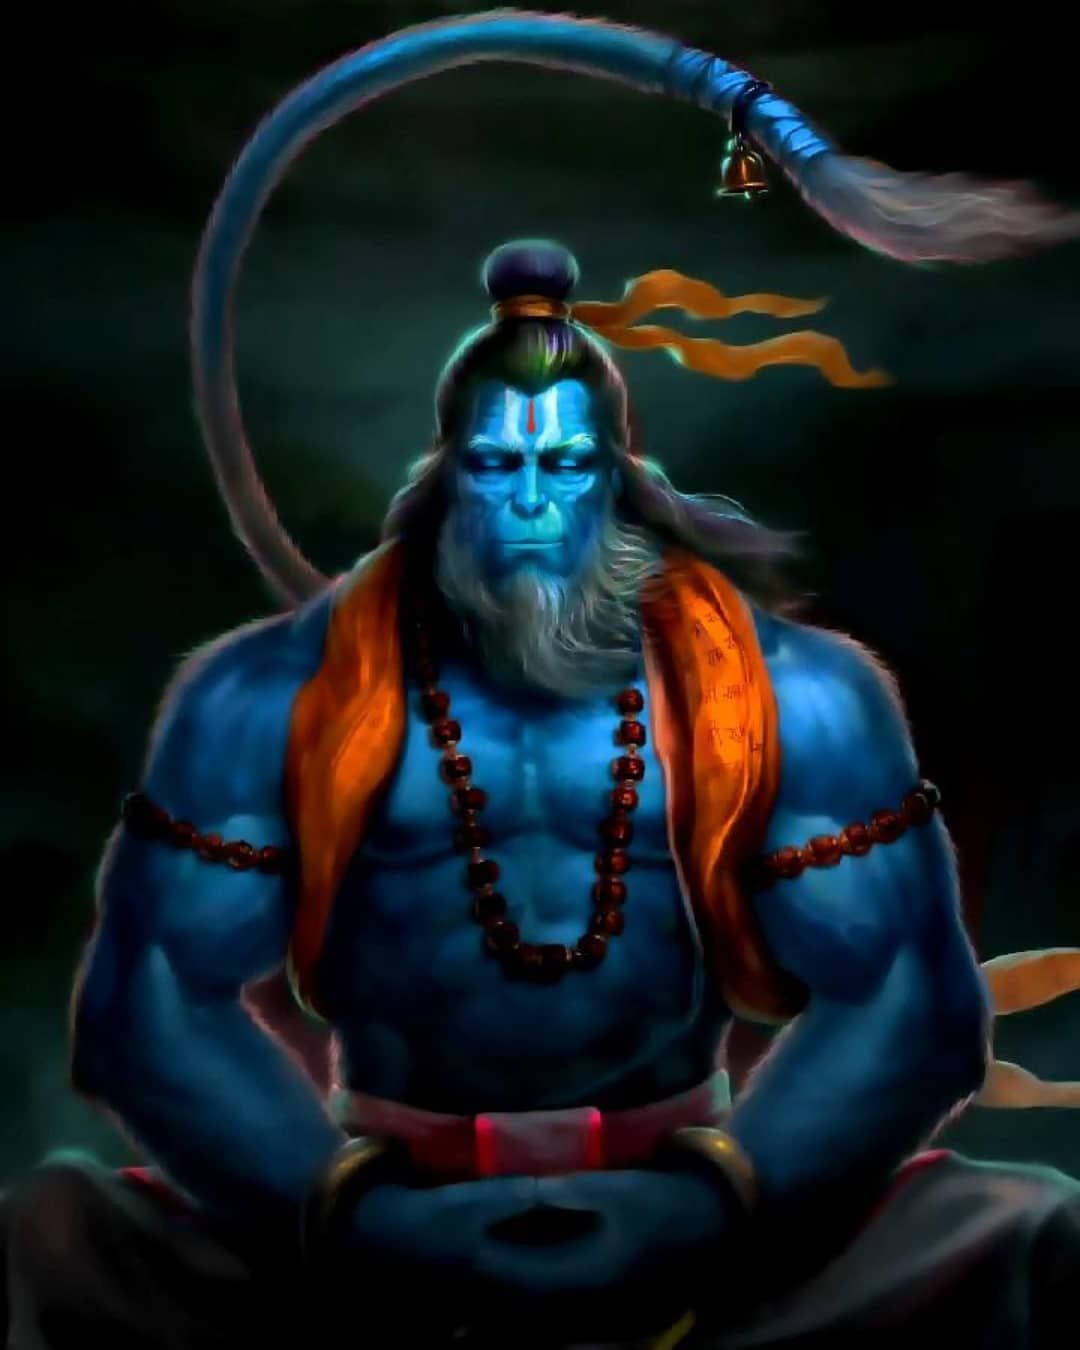 Top 999+ Angry Hanuman Wallpapers Full HD, 4K Free to Use